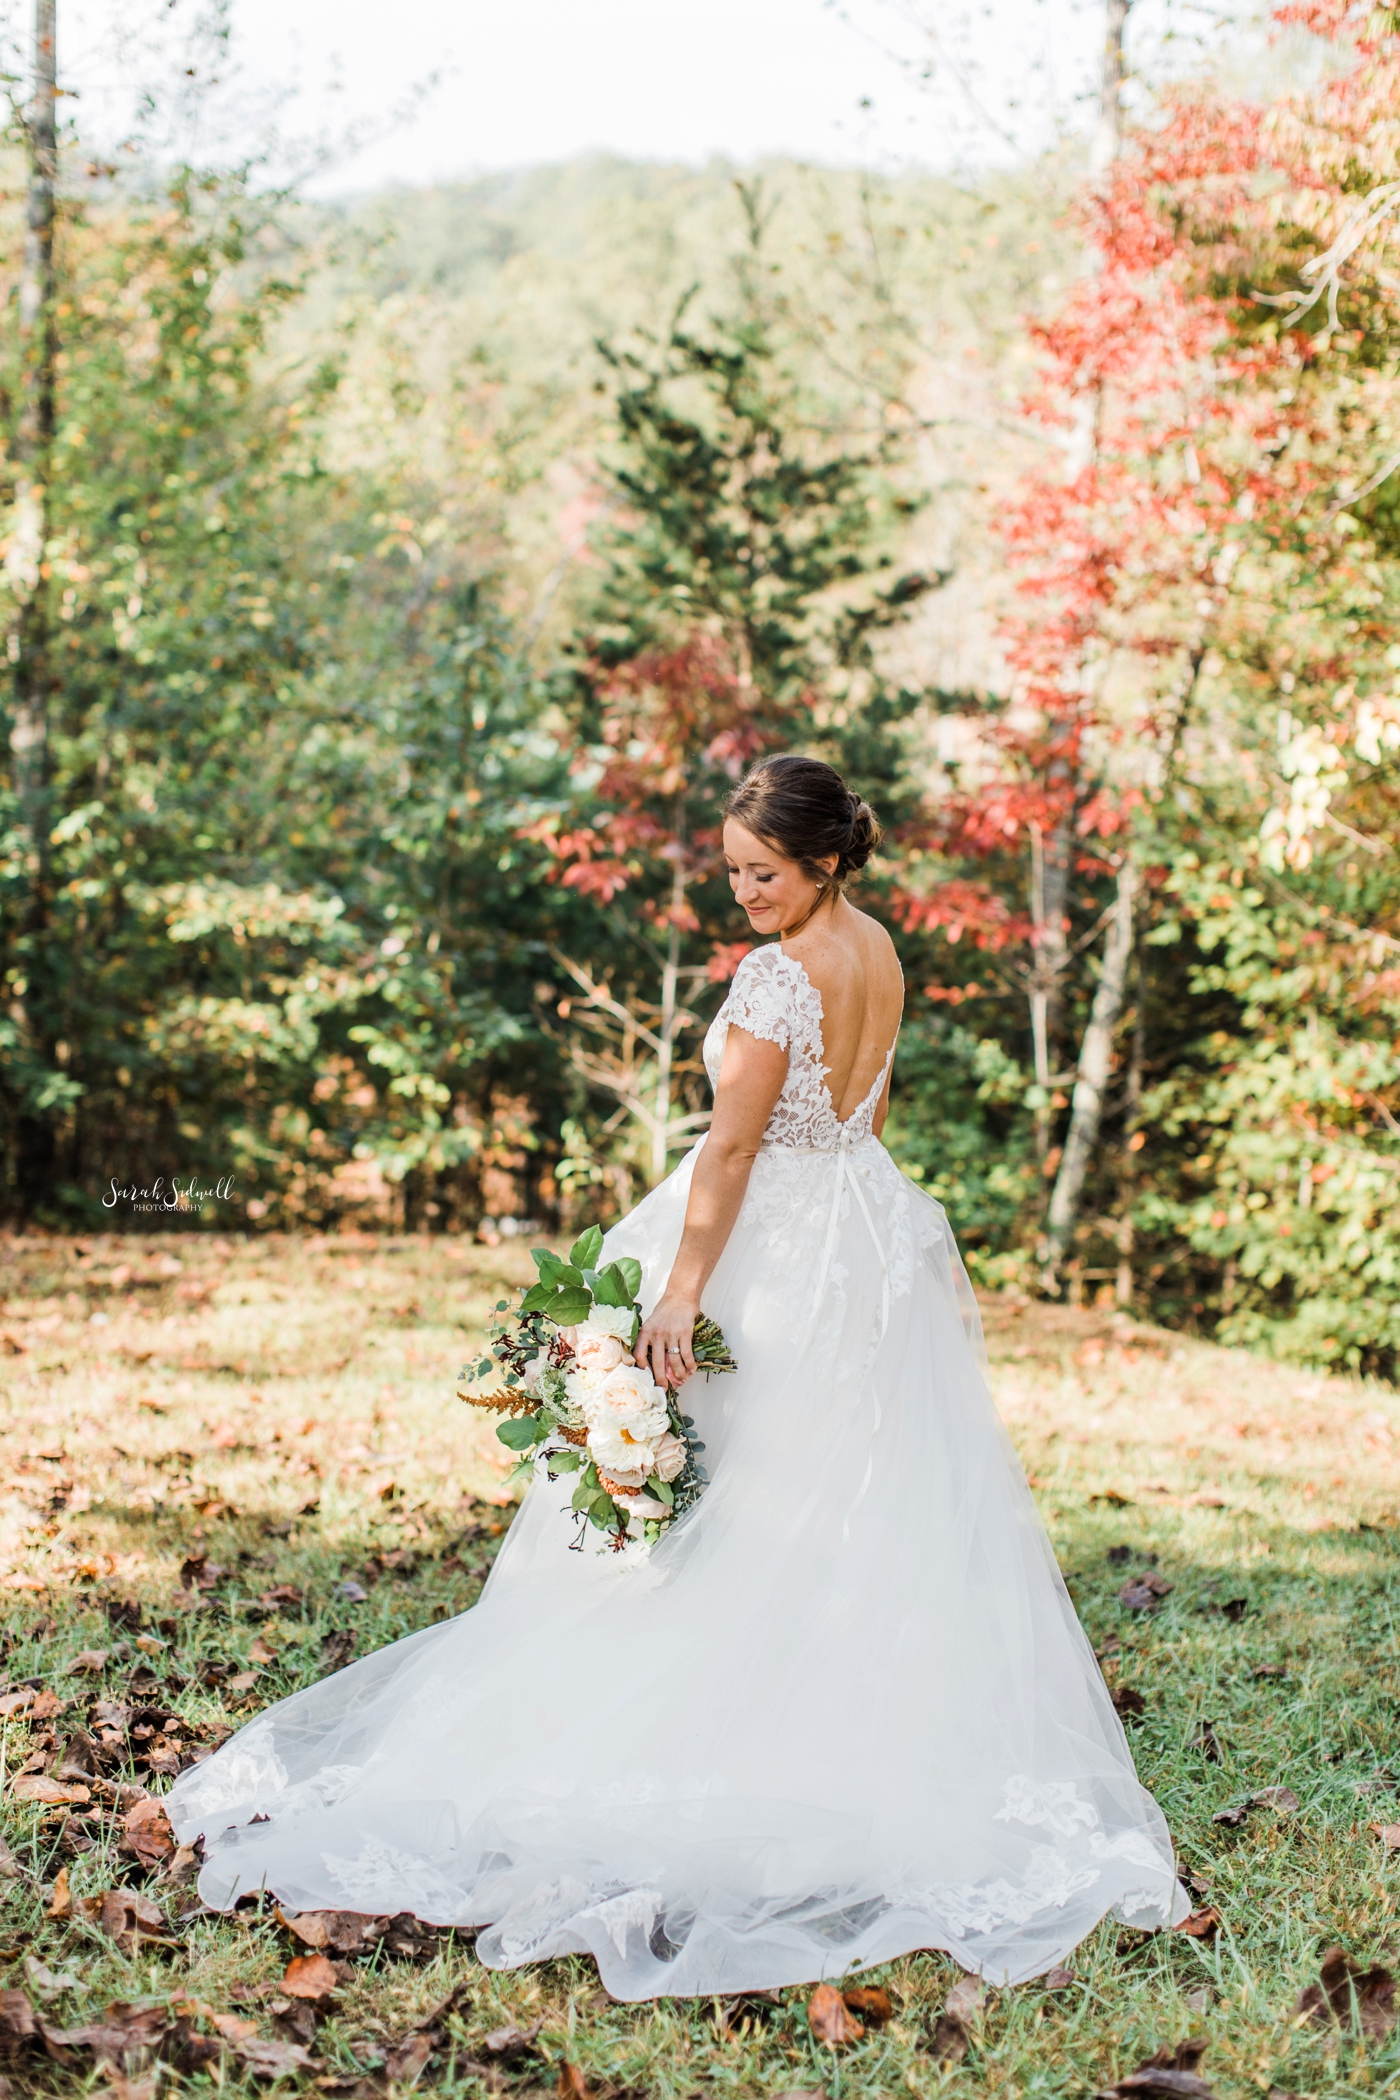 A bride wearing a white dress stands among wild flowers. 